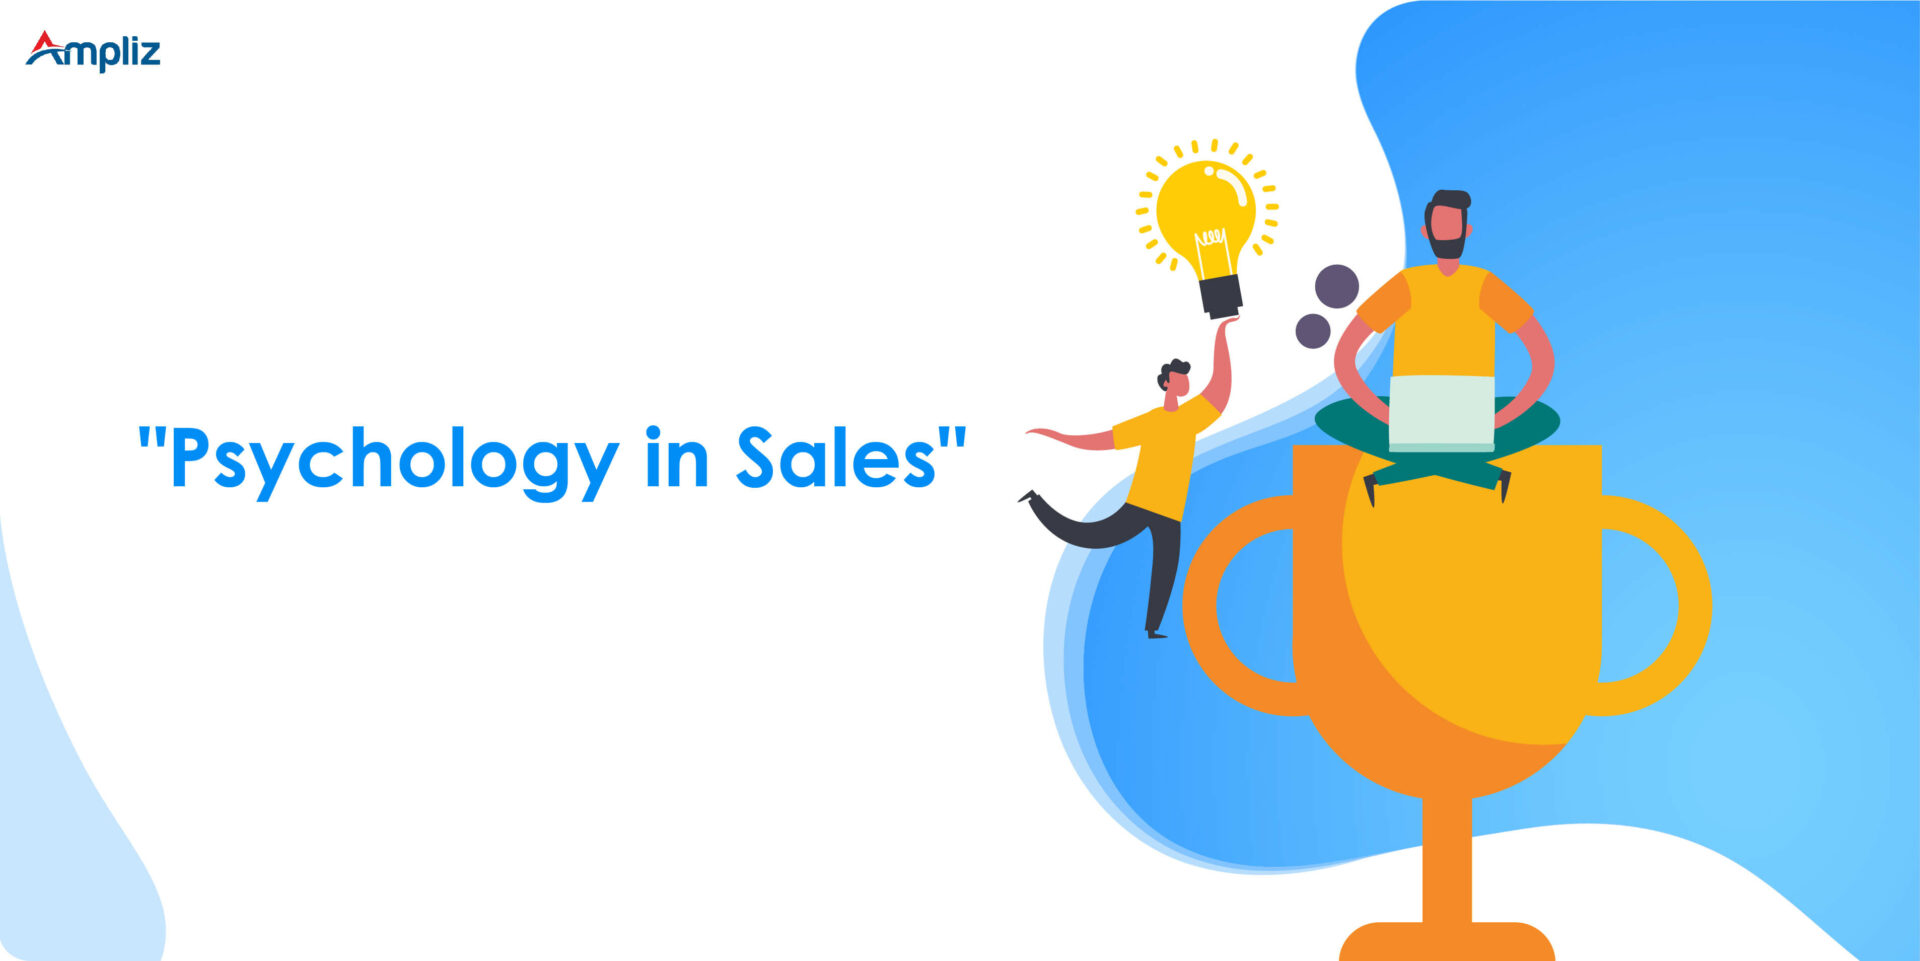 How Is Psychology Used In Sales? - The Psychology Of Selling - Ampliz